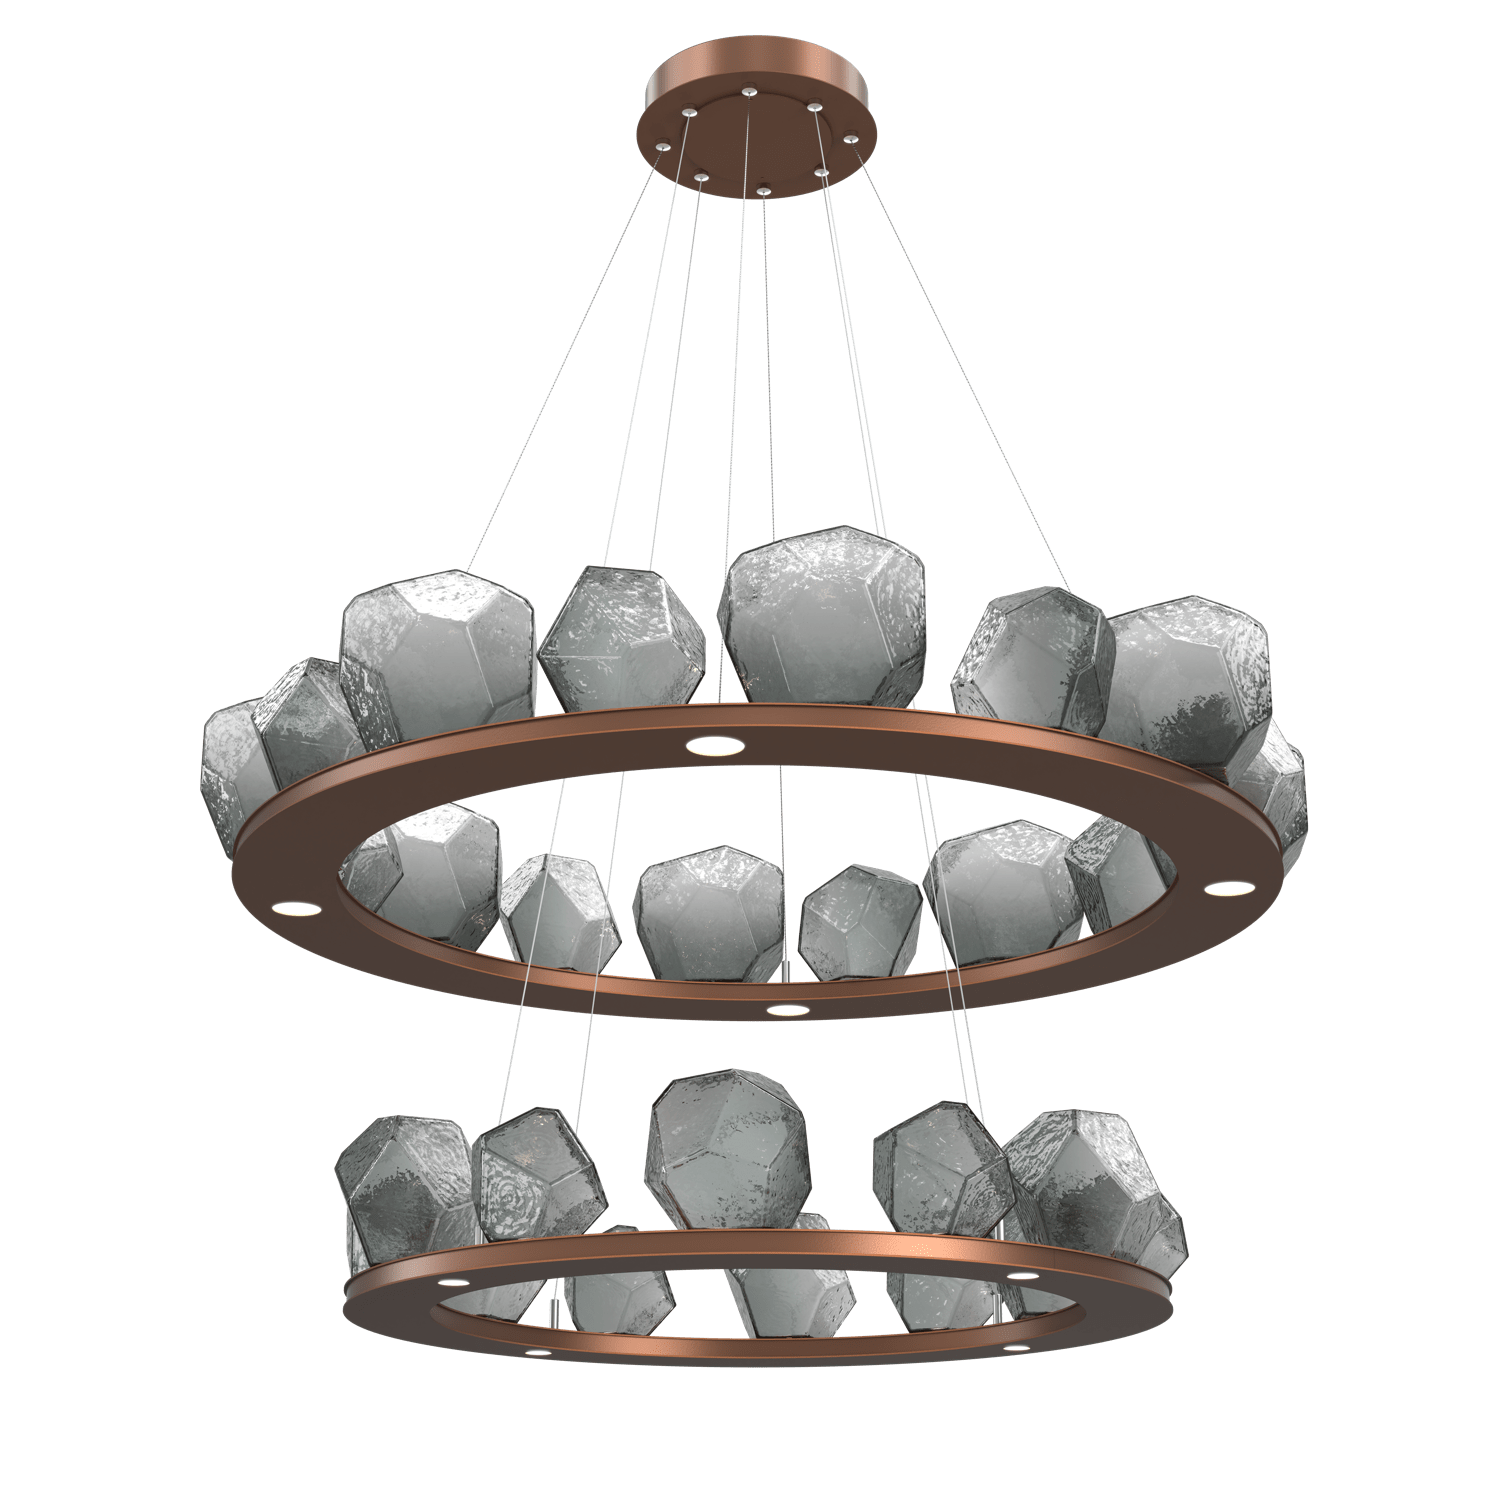 CHB0039-2B-BB-S-Hammerton-Studio-Gem-48-inch-two-tier-ring-chandelier-with-burnished-bronze-finish-and-smoke-blown-glass-shades-and-LED-lamping